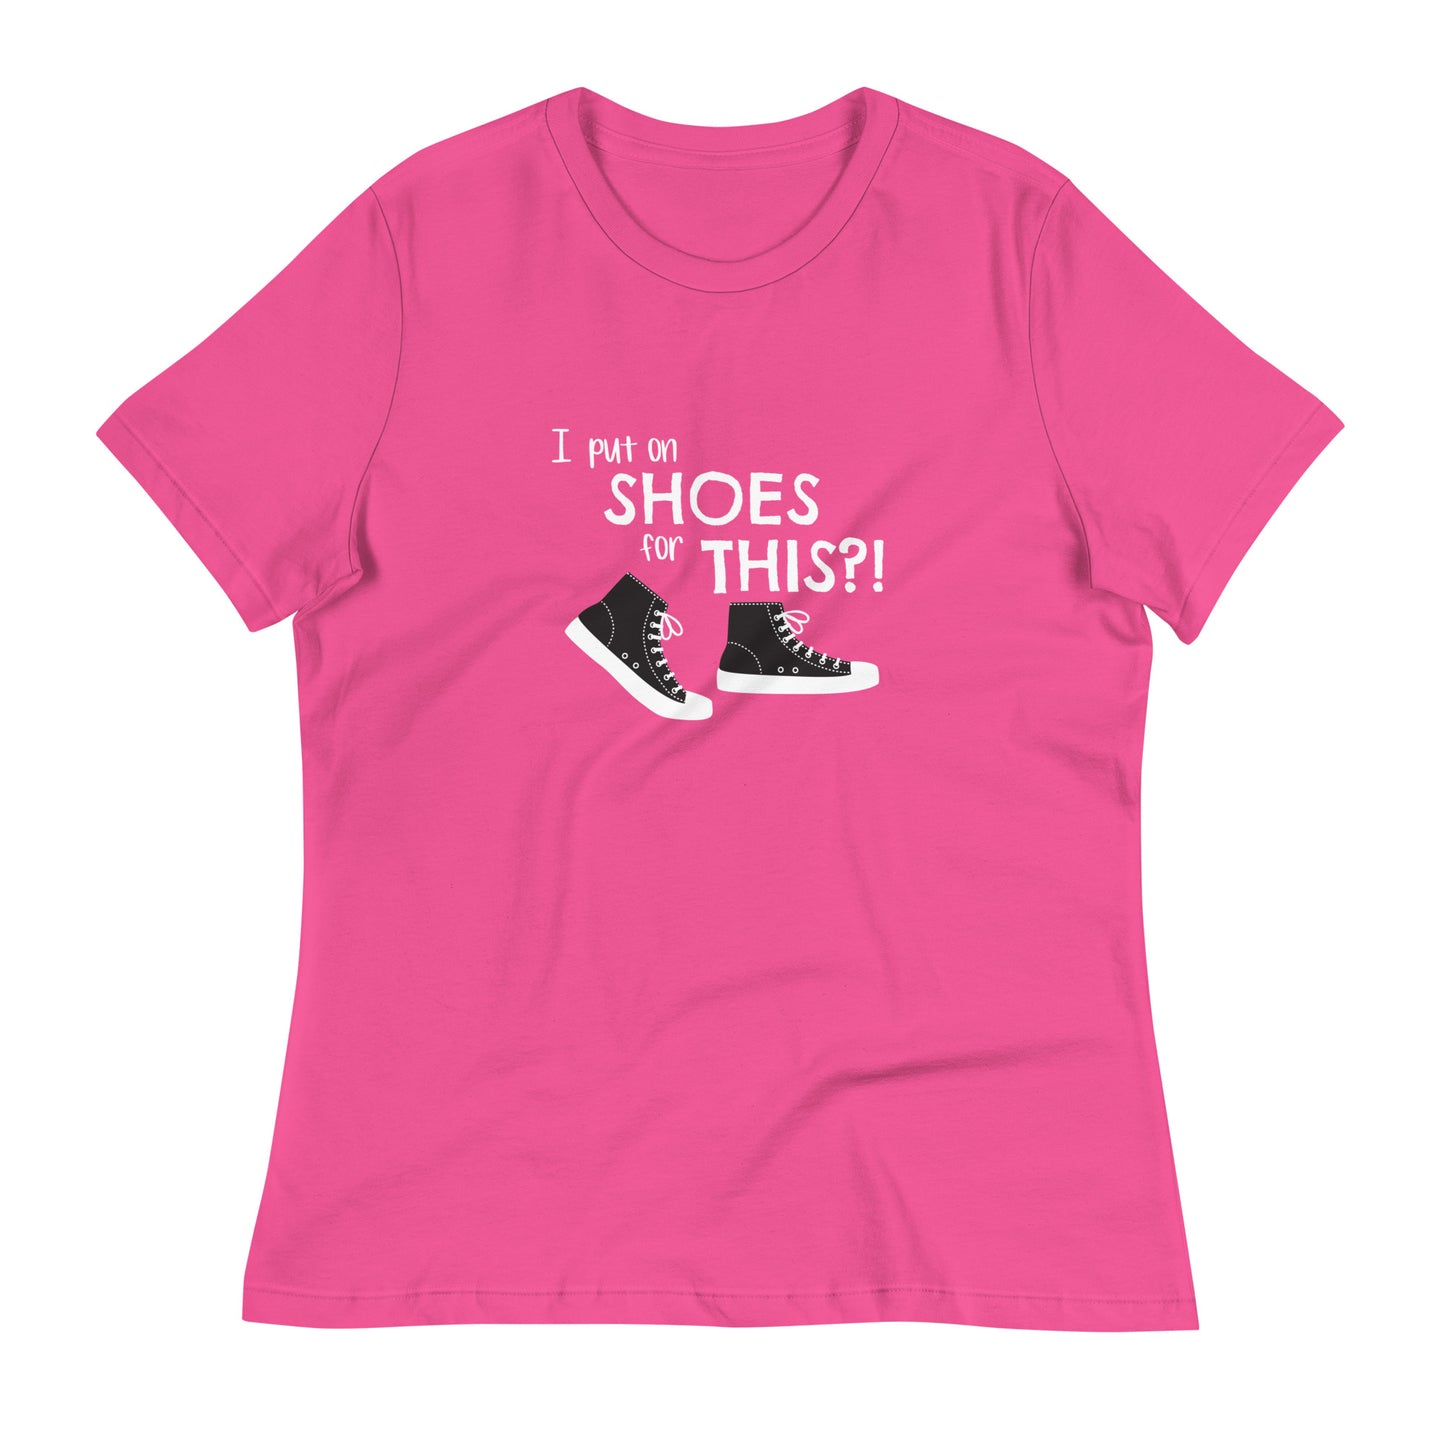 Berry (hot pink) women's relaxed fit t-shirt with graphic of black and white canvas "chuck" sneakers and text: "I put on SHOES for THIS?!"